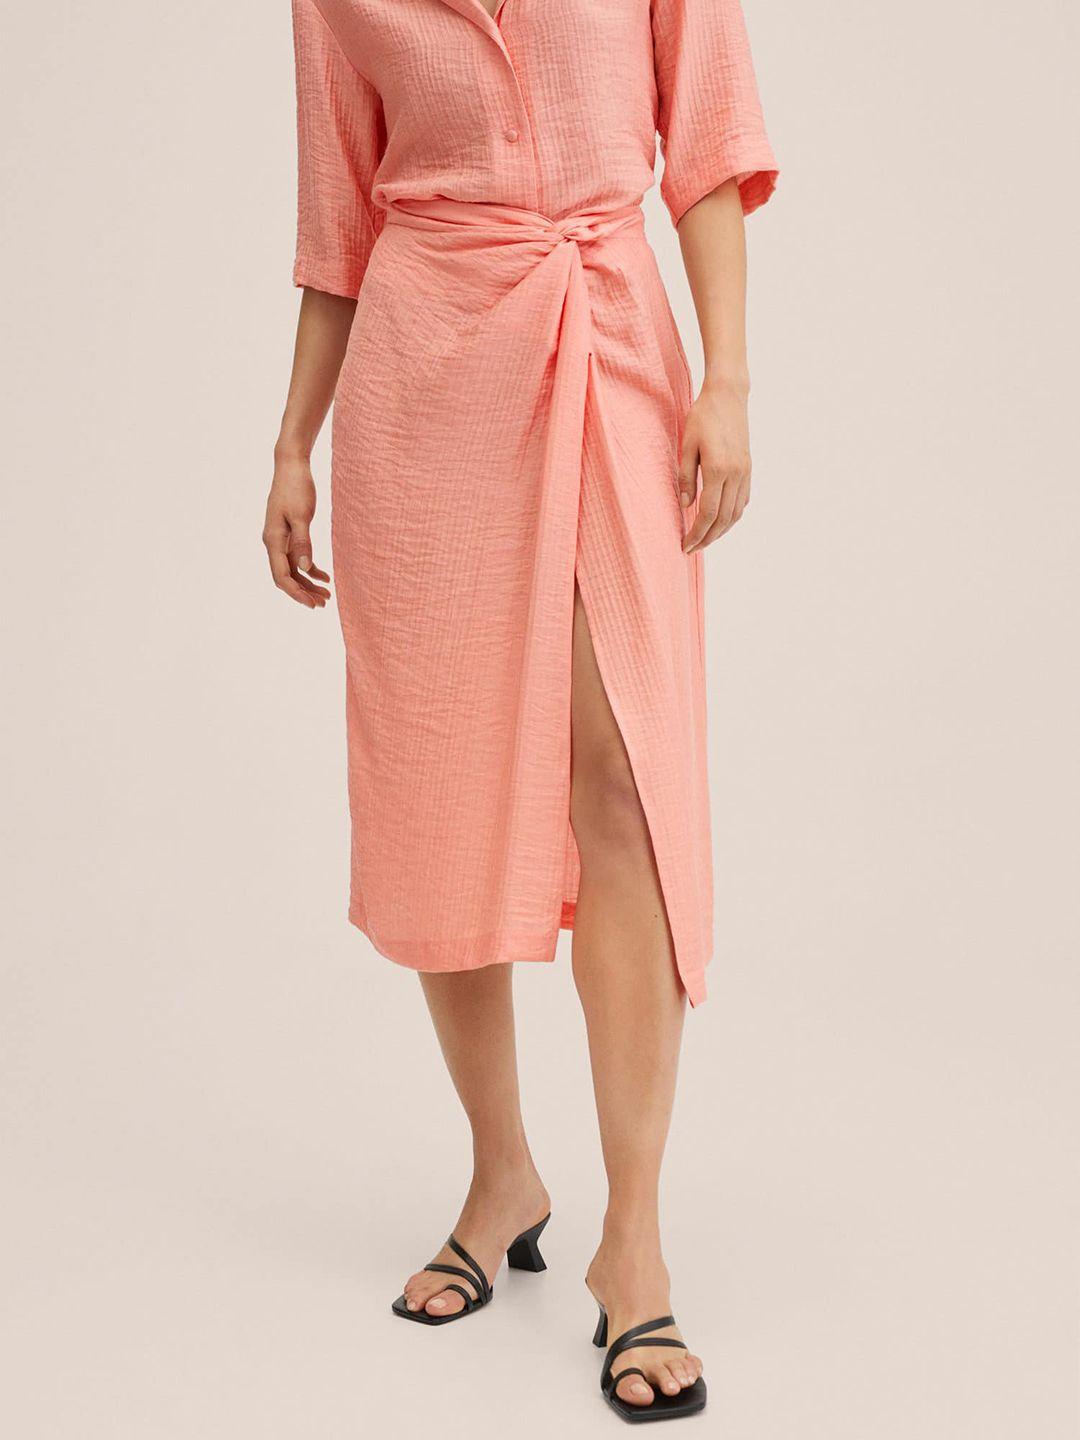 mango-coral-pink-solid-a-line-midi-skirt